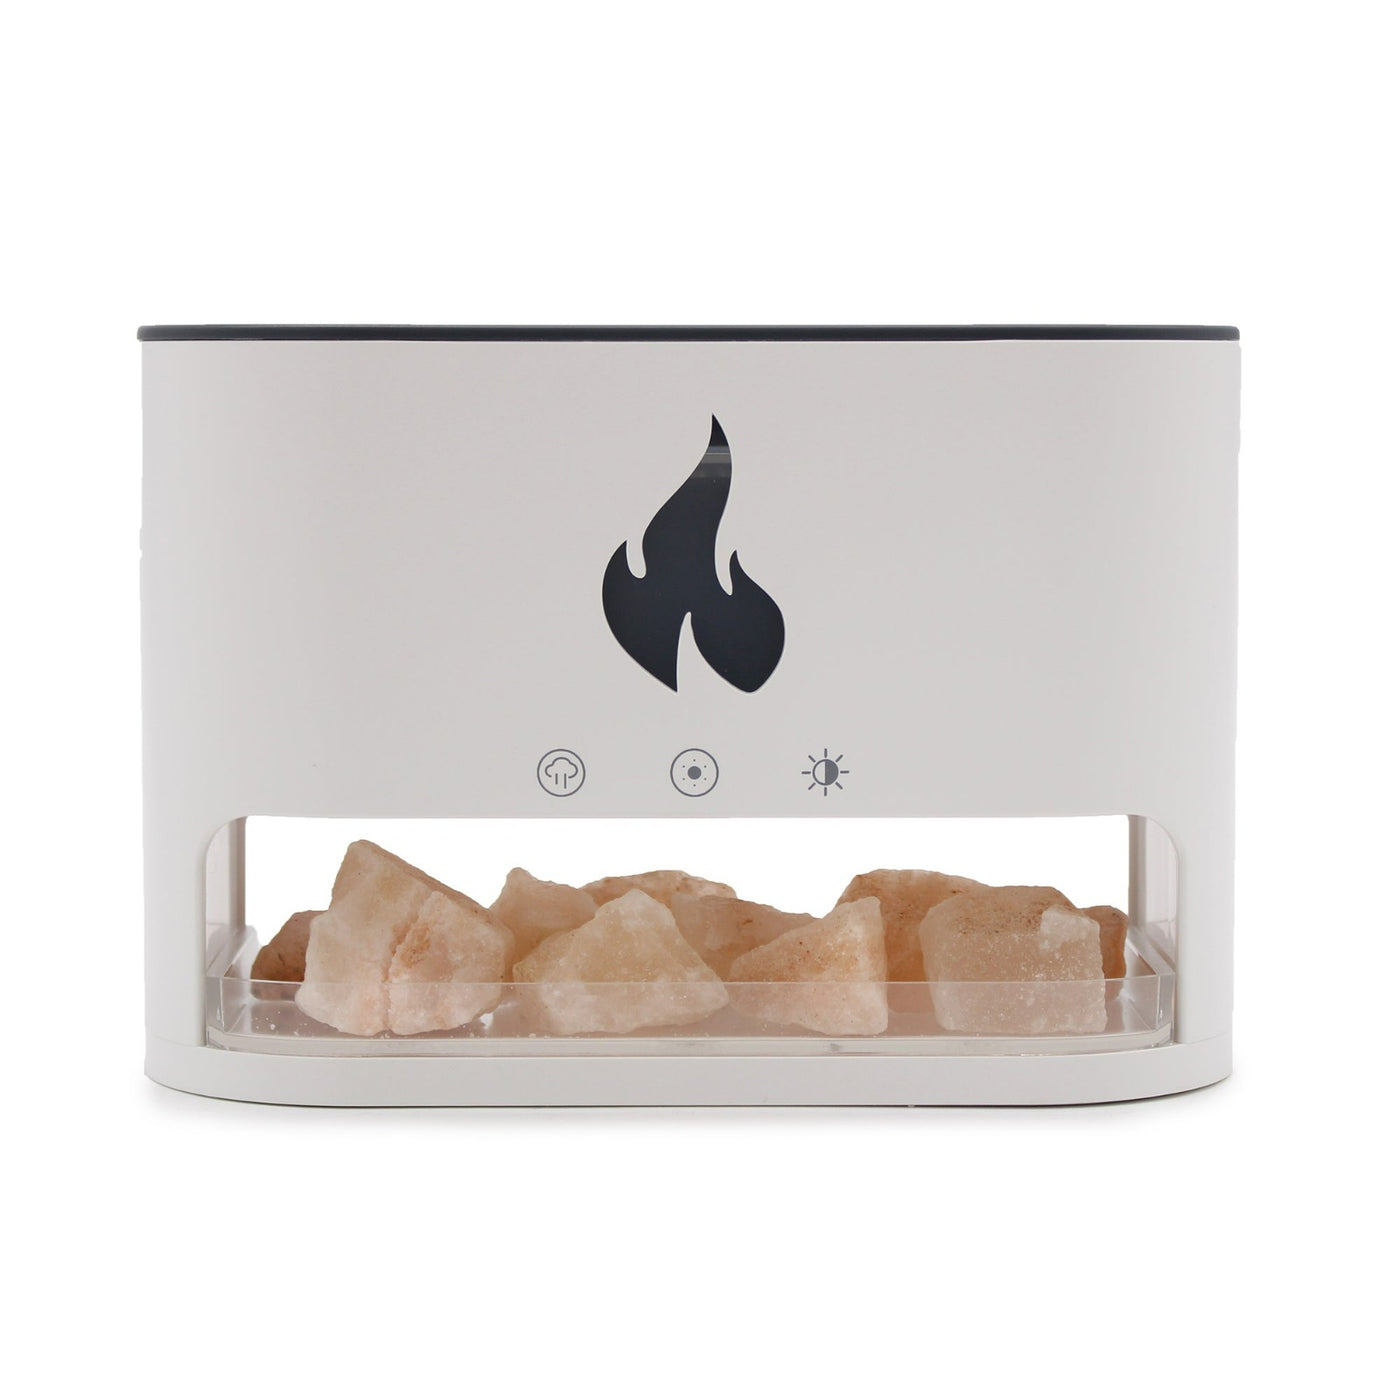 White Flame Effect Aroma Diffuser With Himalayan Salt Chamber.